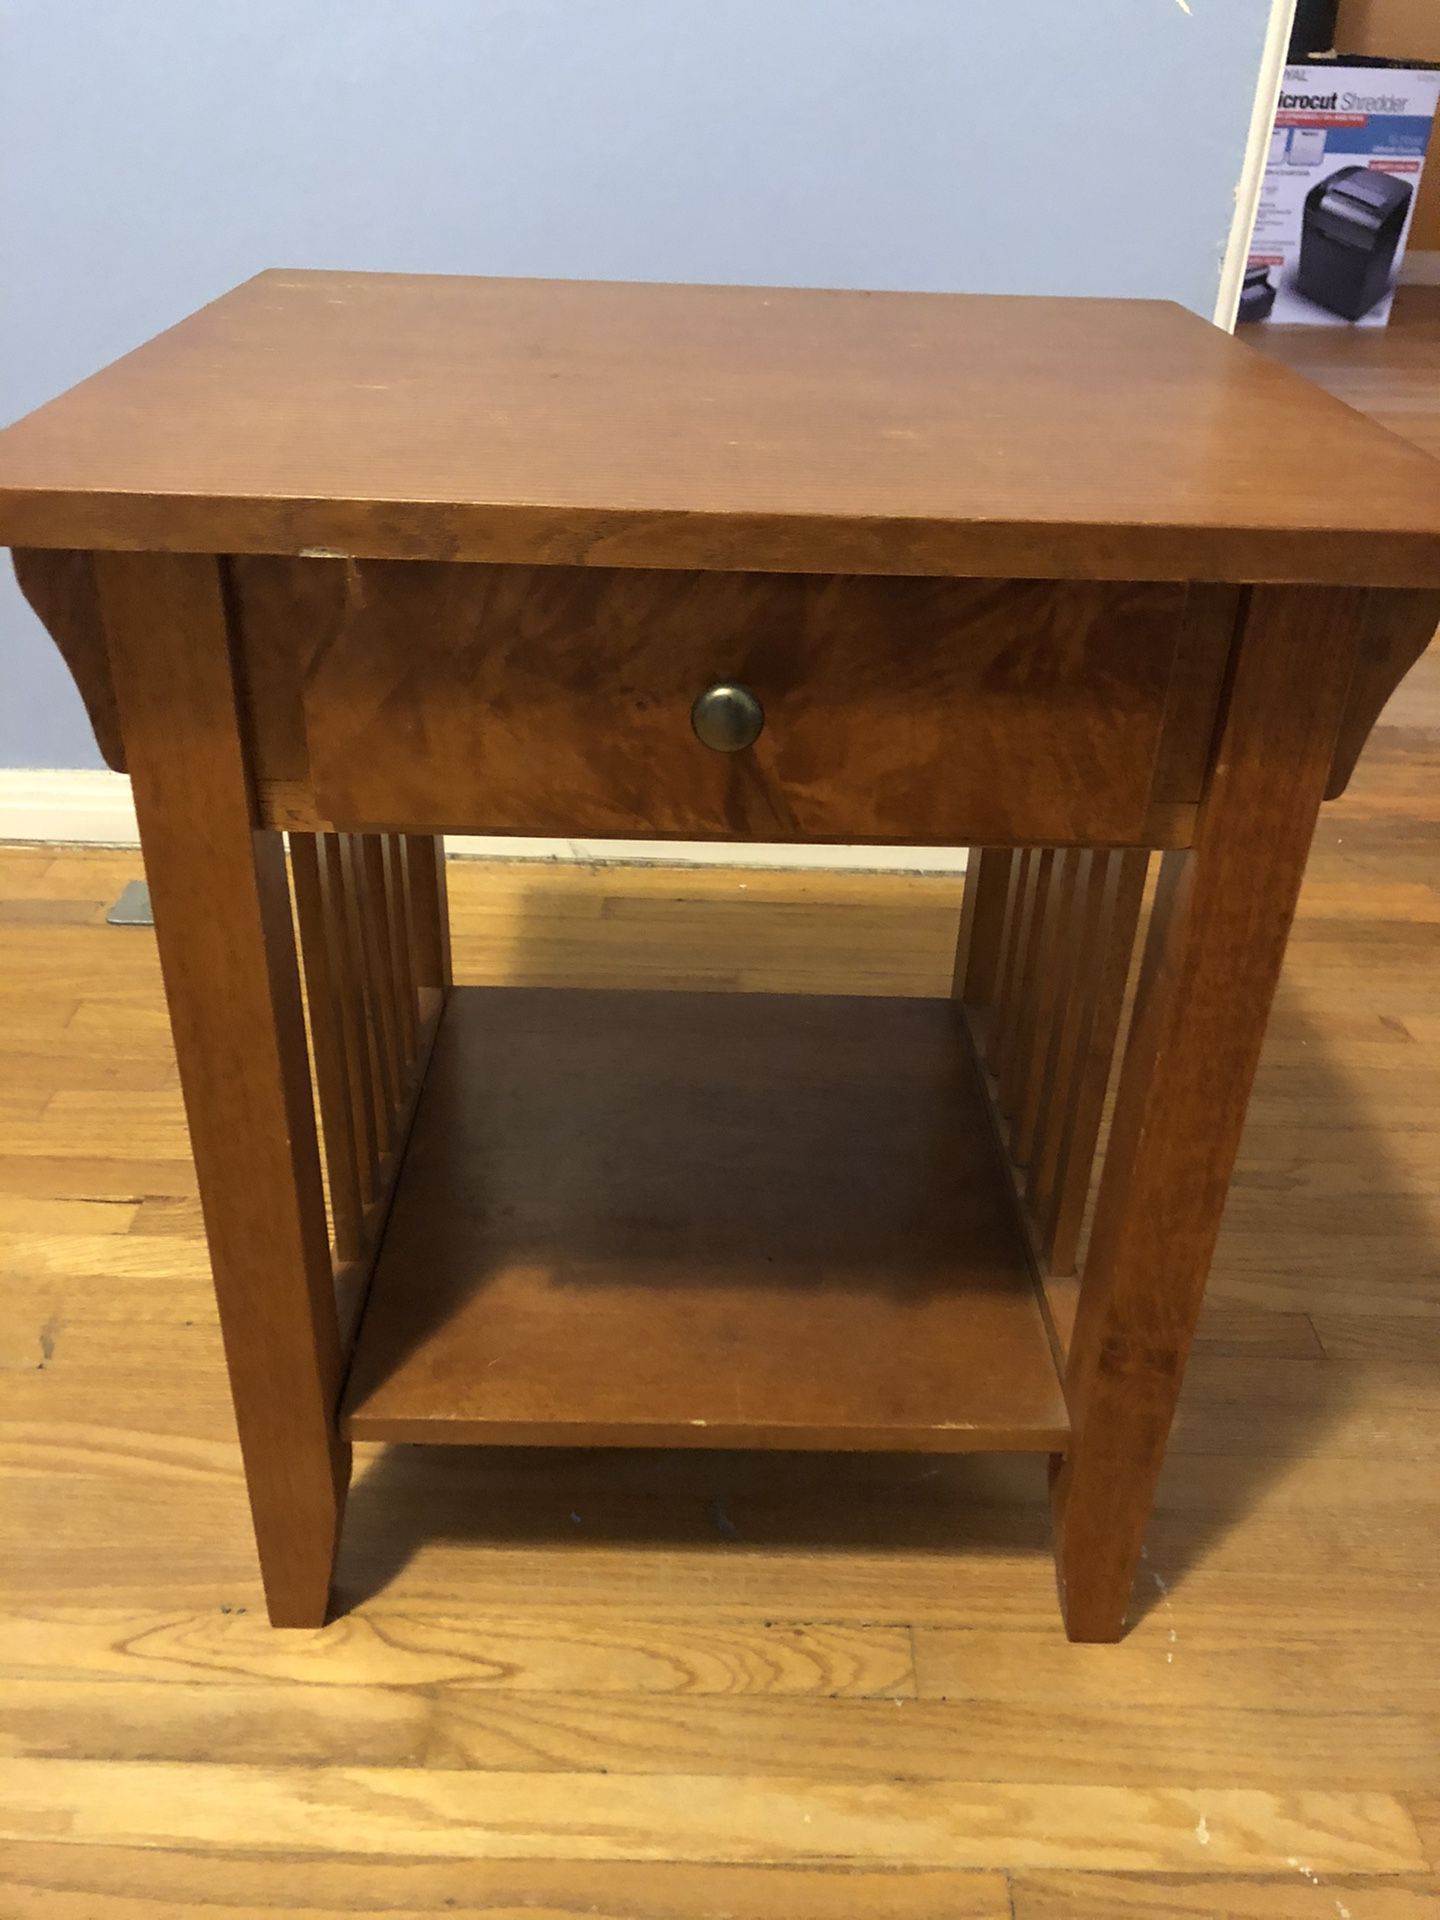 FREE - end table